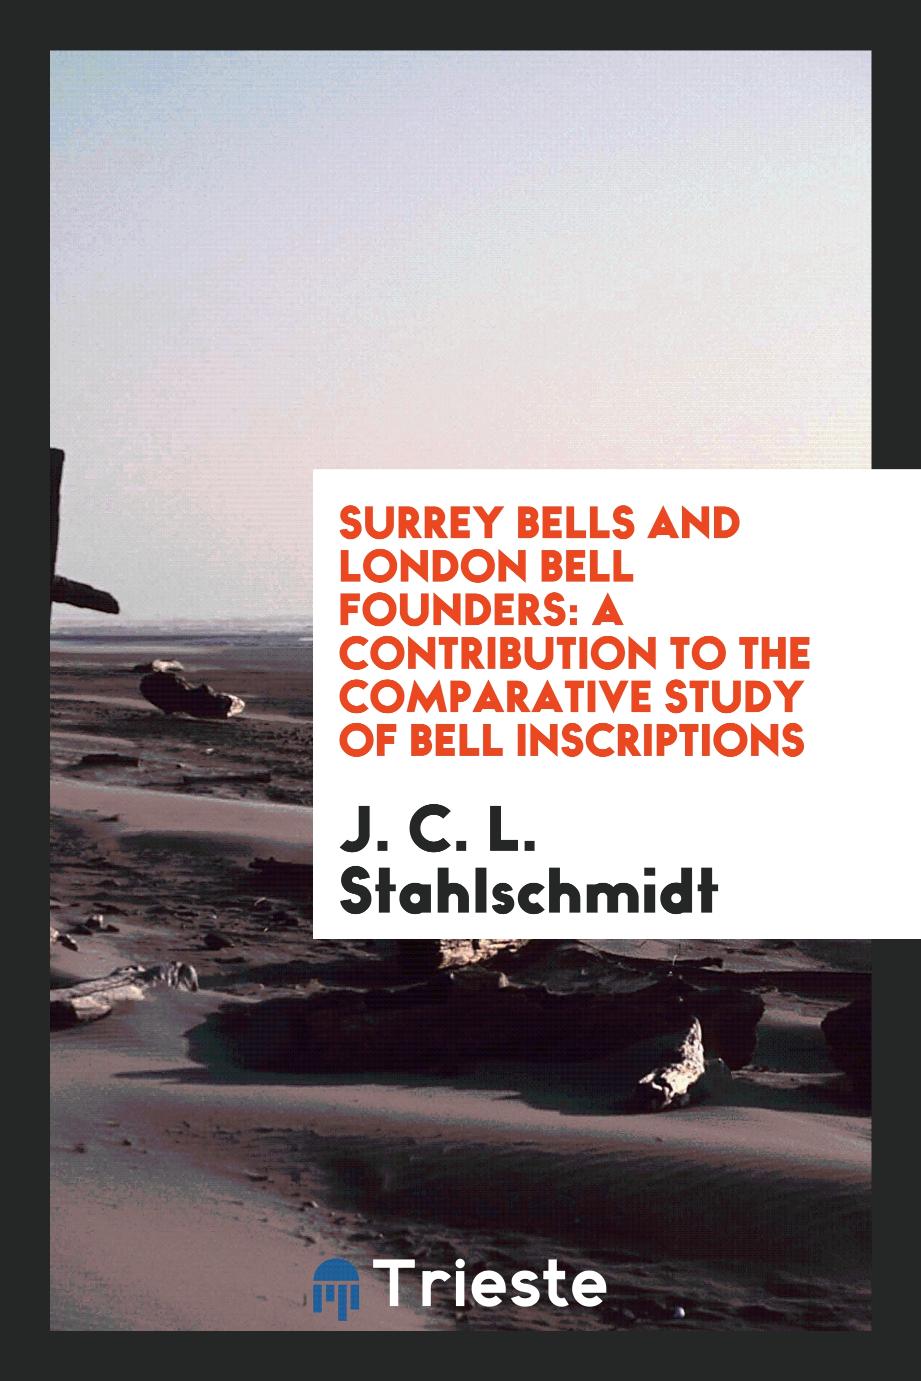 Surrey bells and London bell founders: A contribution to the comparative study of bell inscriptions